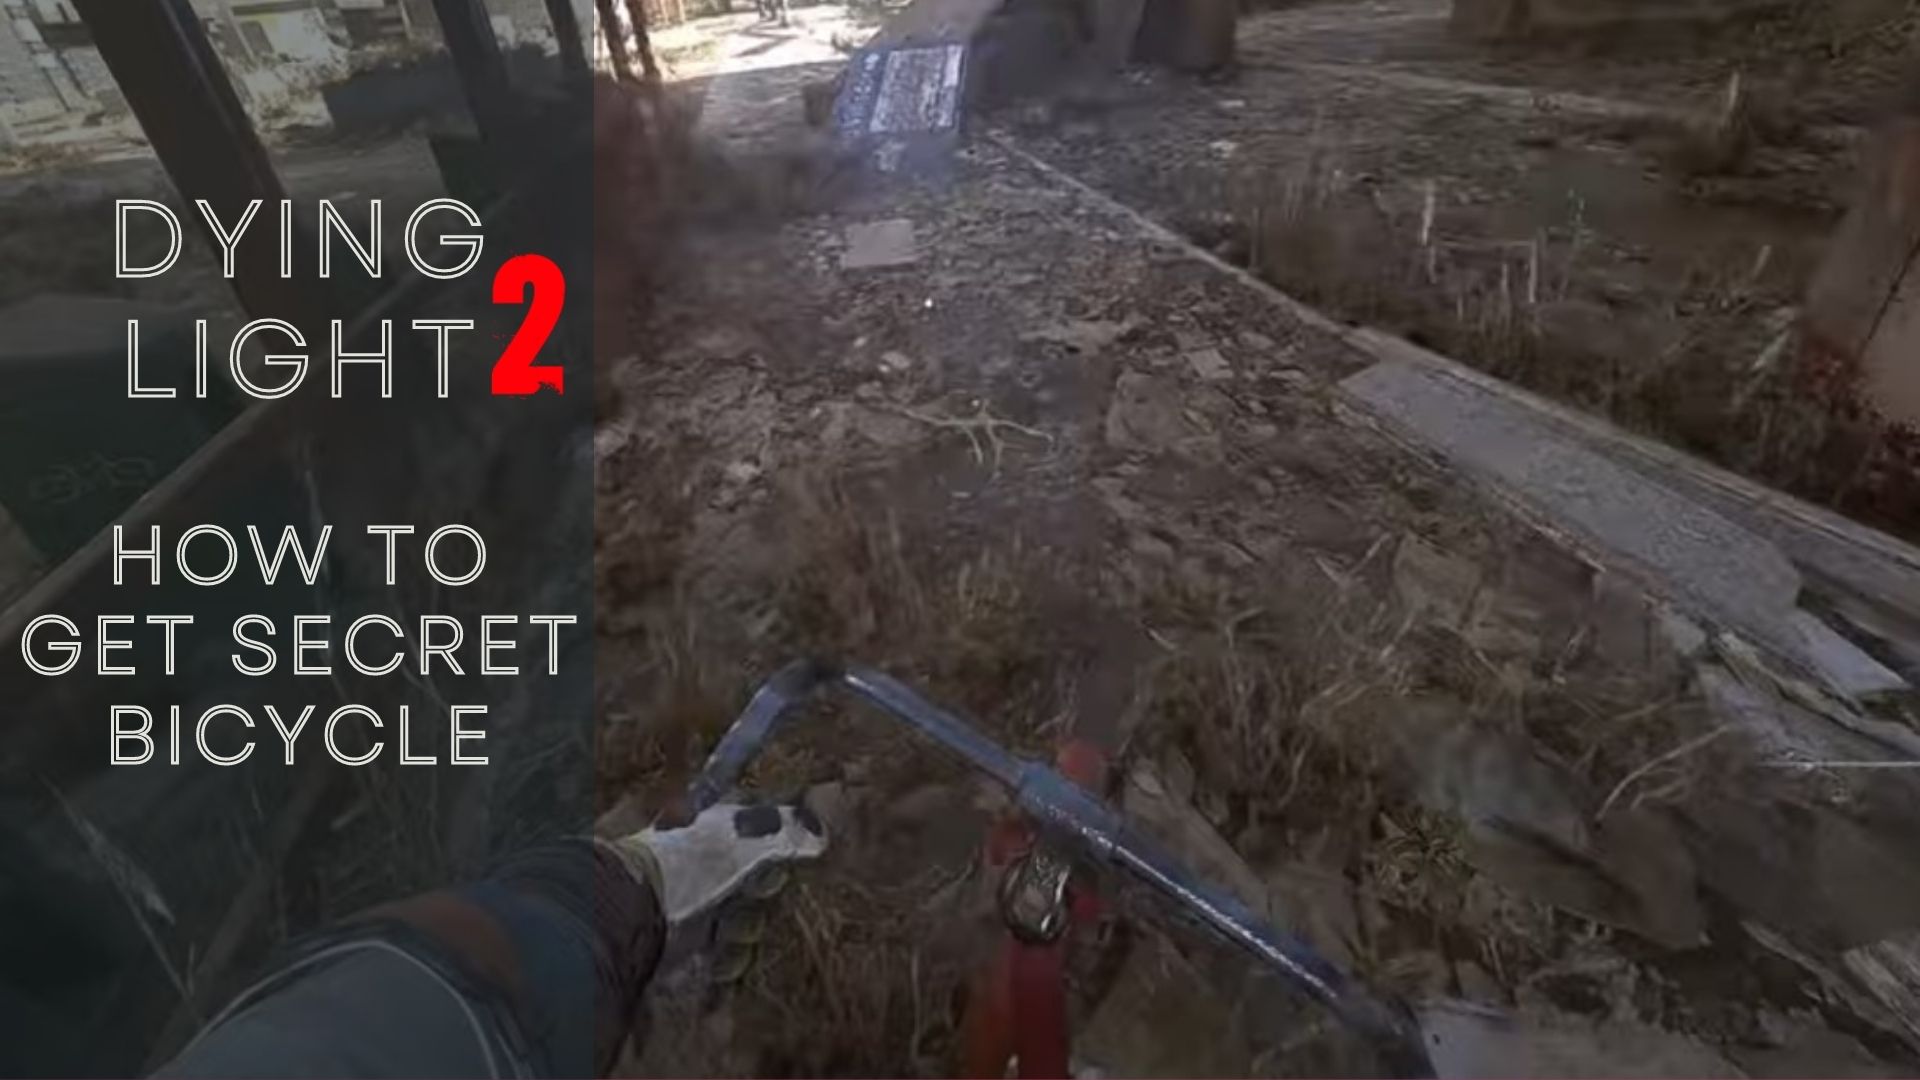 Getting Secret Bicycle Dying Light 2